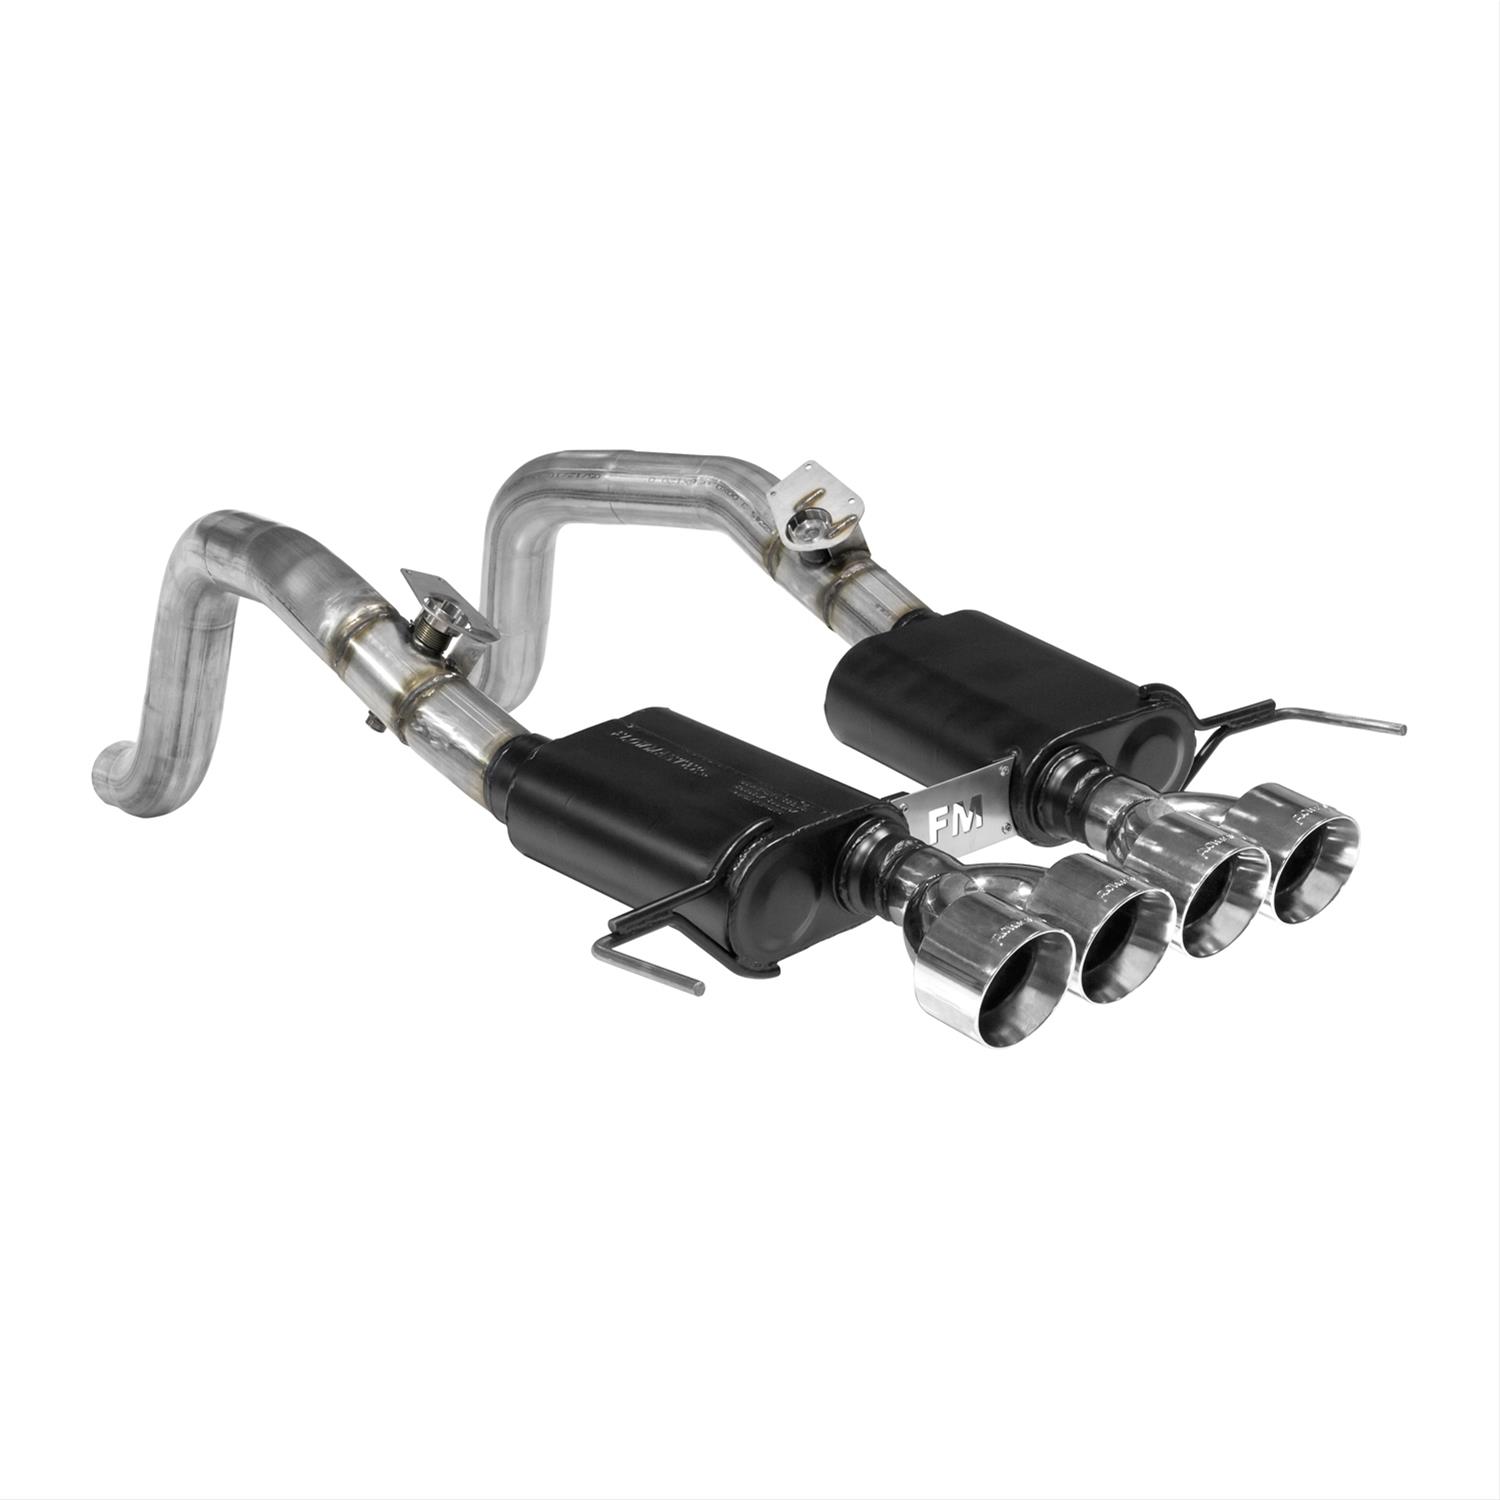 Flowmaster 817754 Flowmaster Outlaw Series Exhaust Systems